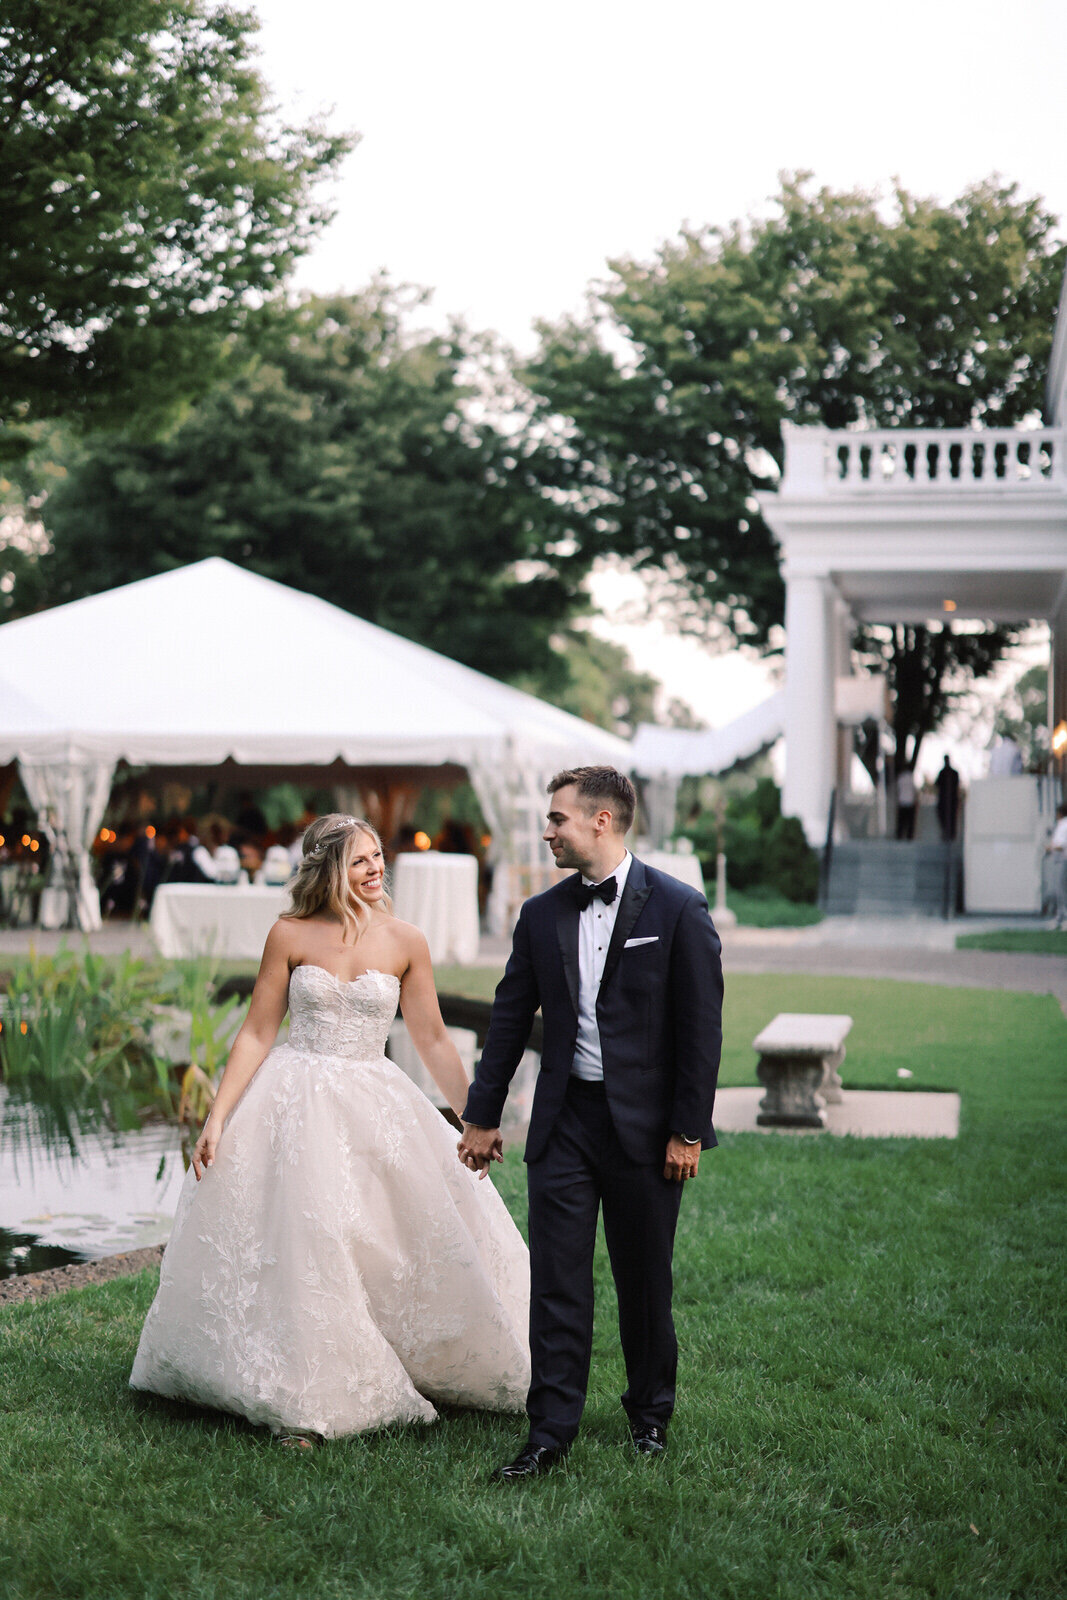 Intimate wedding portraits at an elegant summer wedding at Strong Mansion, a historic wedding venue in Maryland.